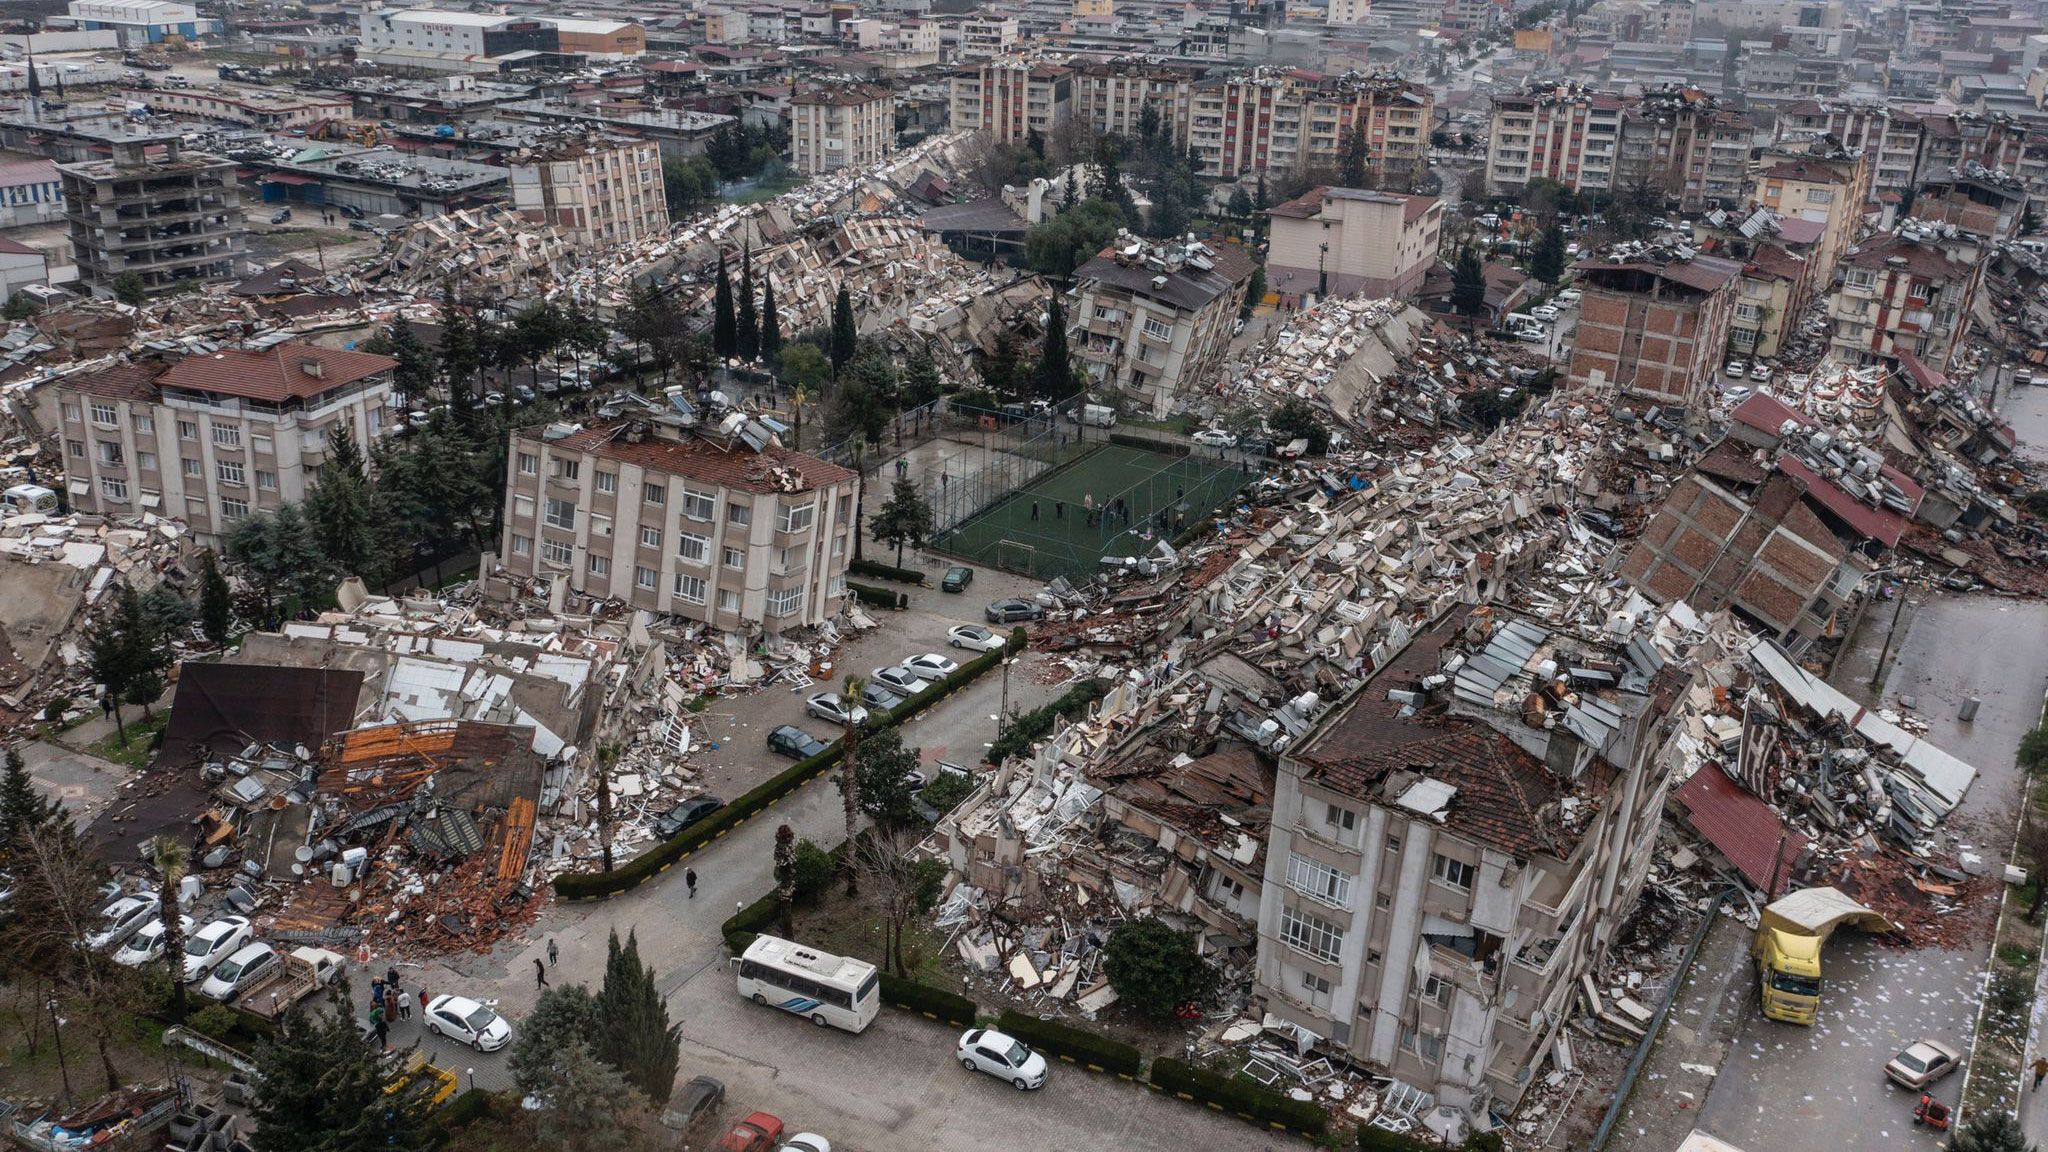 How to help victims of the earthquake in Turkey and Syria | CNN